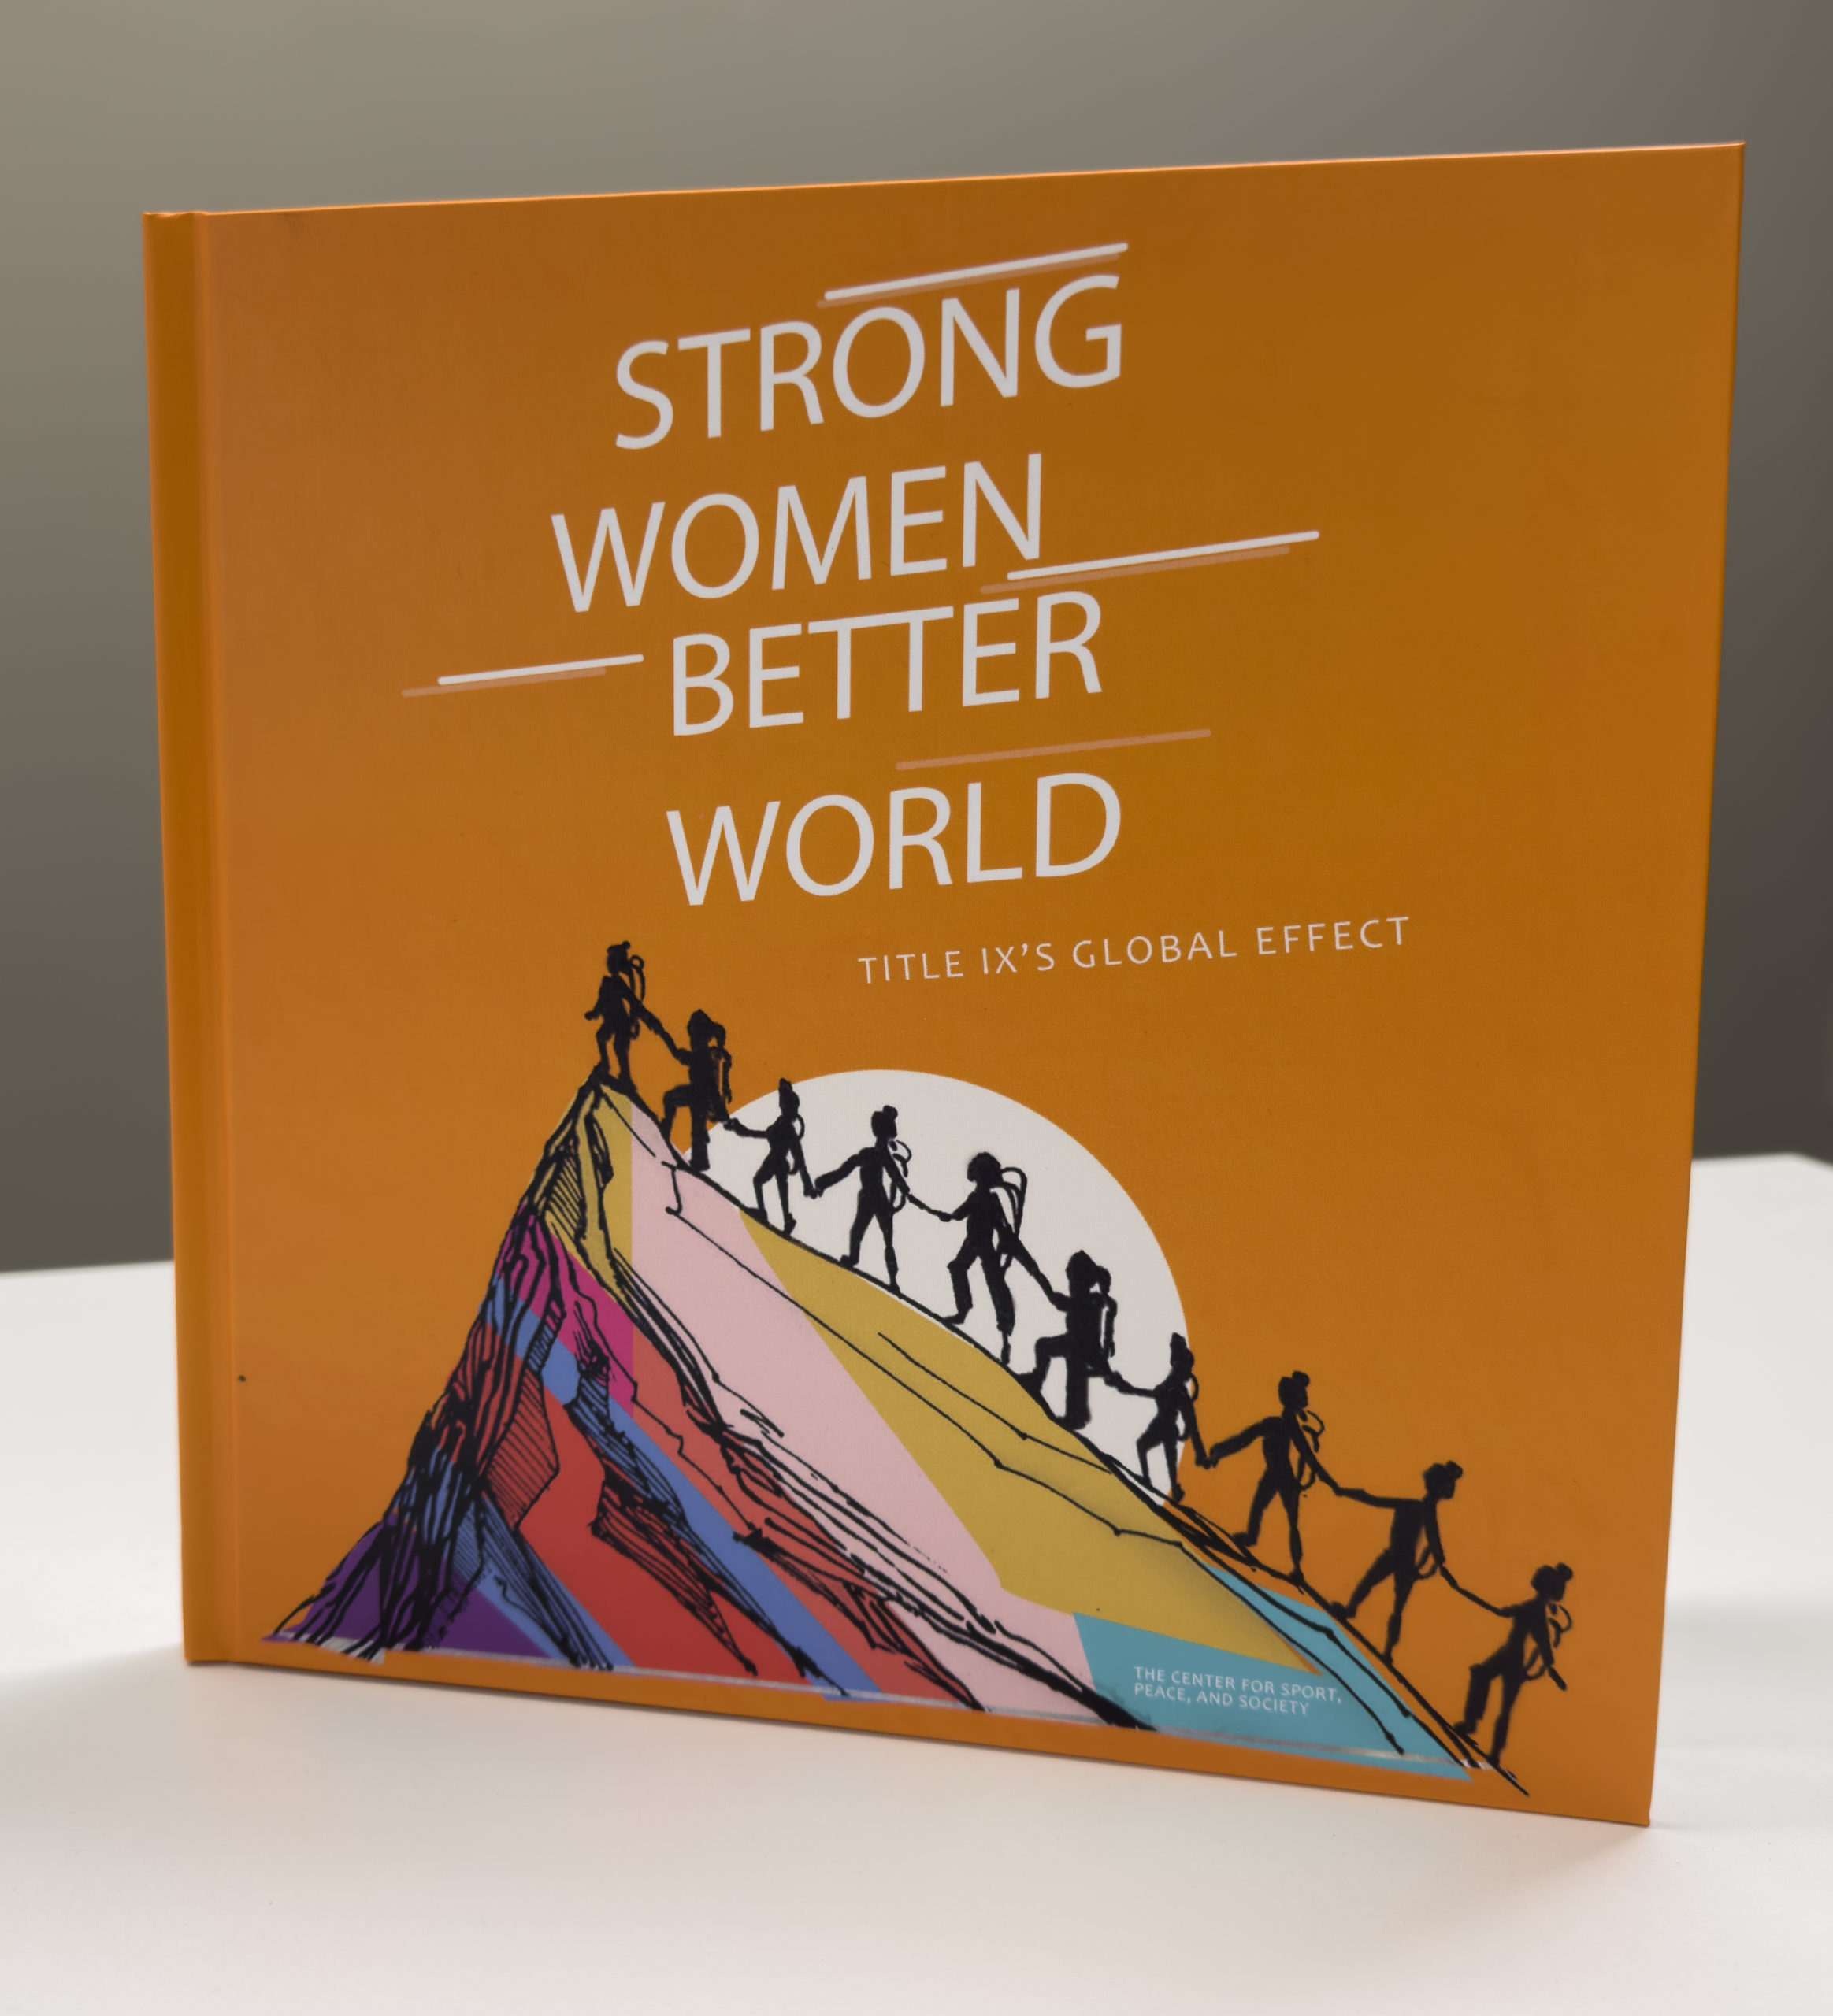 Photo of the book Strong Women Better World. The has an orange cover with the text, Strong Women Better World and has a drawing depicting a group of women silhouettes scaling a mountain. The book is placed on a table .